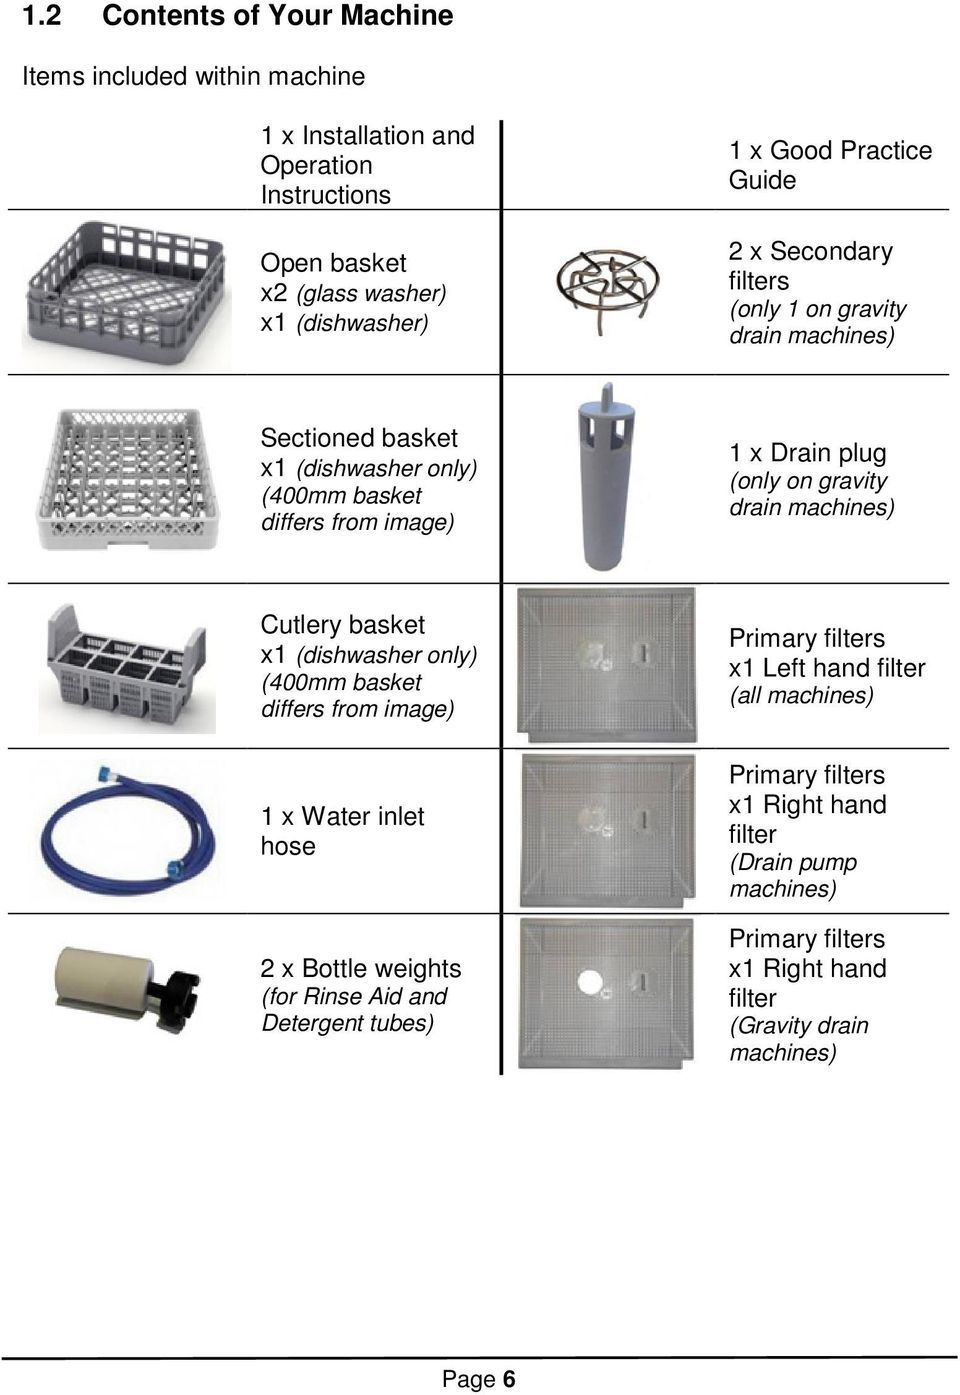 drain machines) Cutlery basket x1 (dishwasher only) (400mm basket differs from image) Primary filters x1 Left hand filter (all machines) 1 x Water inlet hose 2 x Bottle